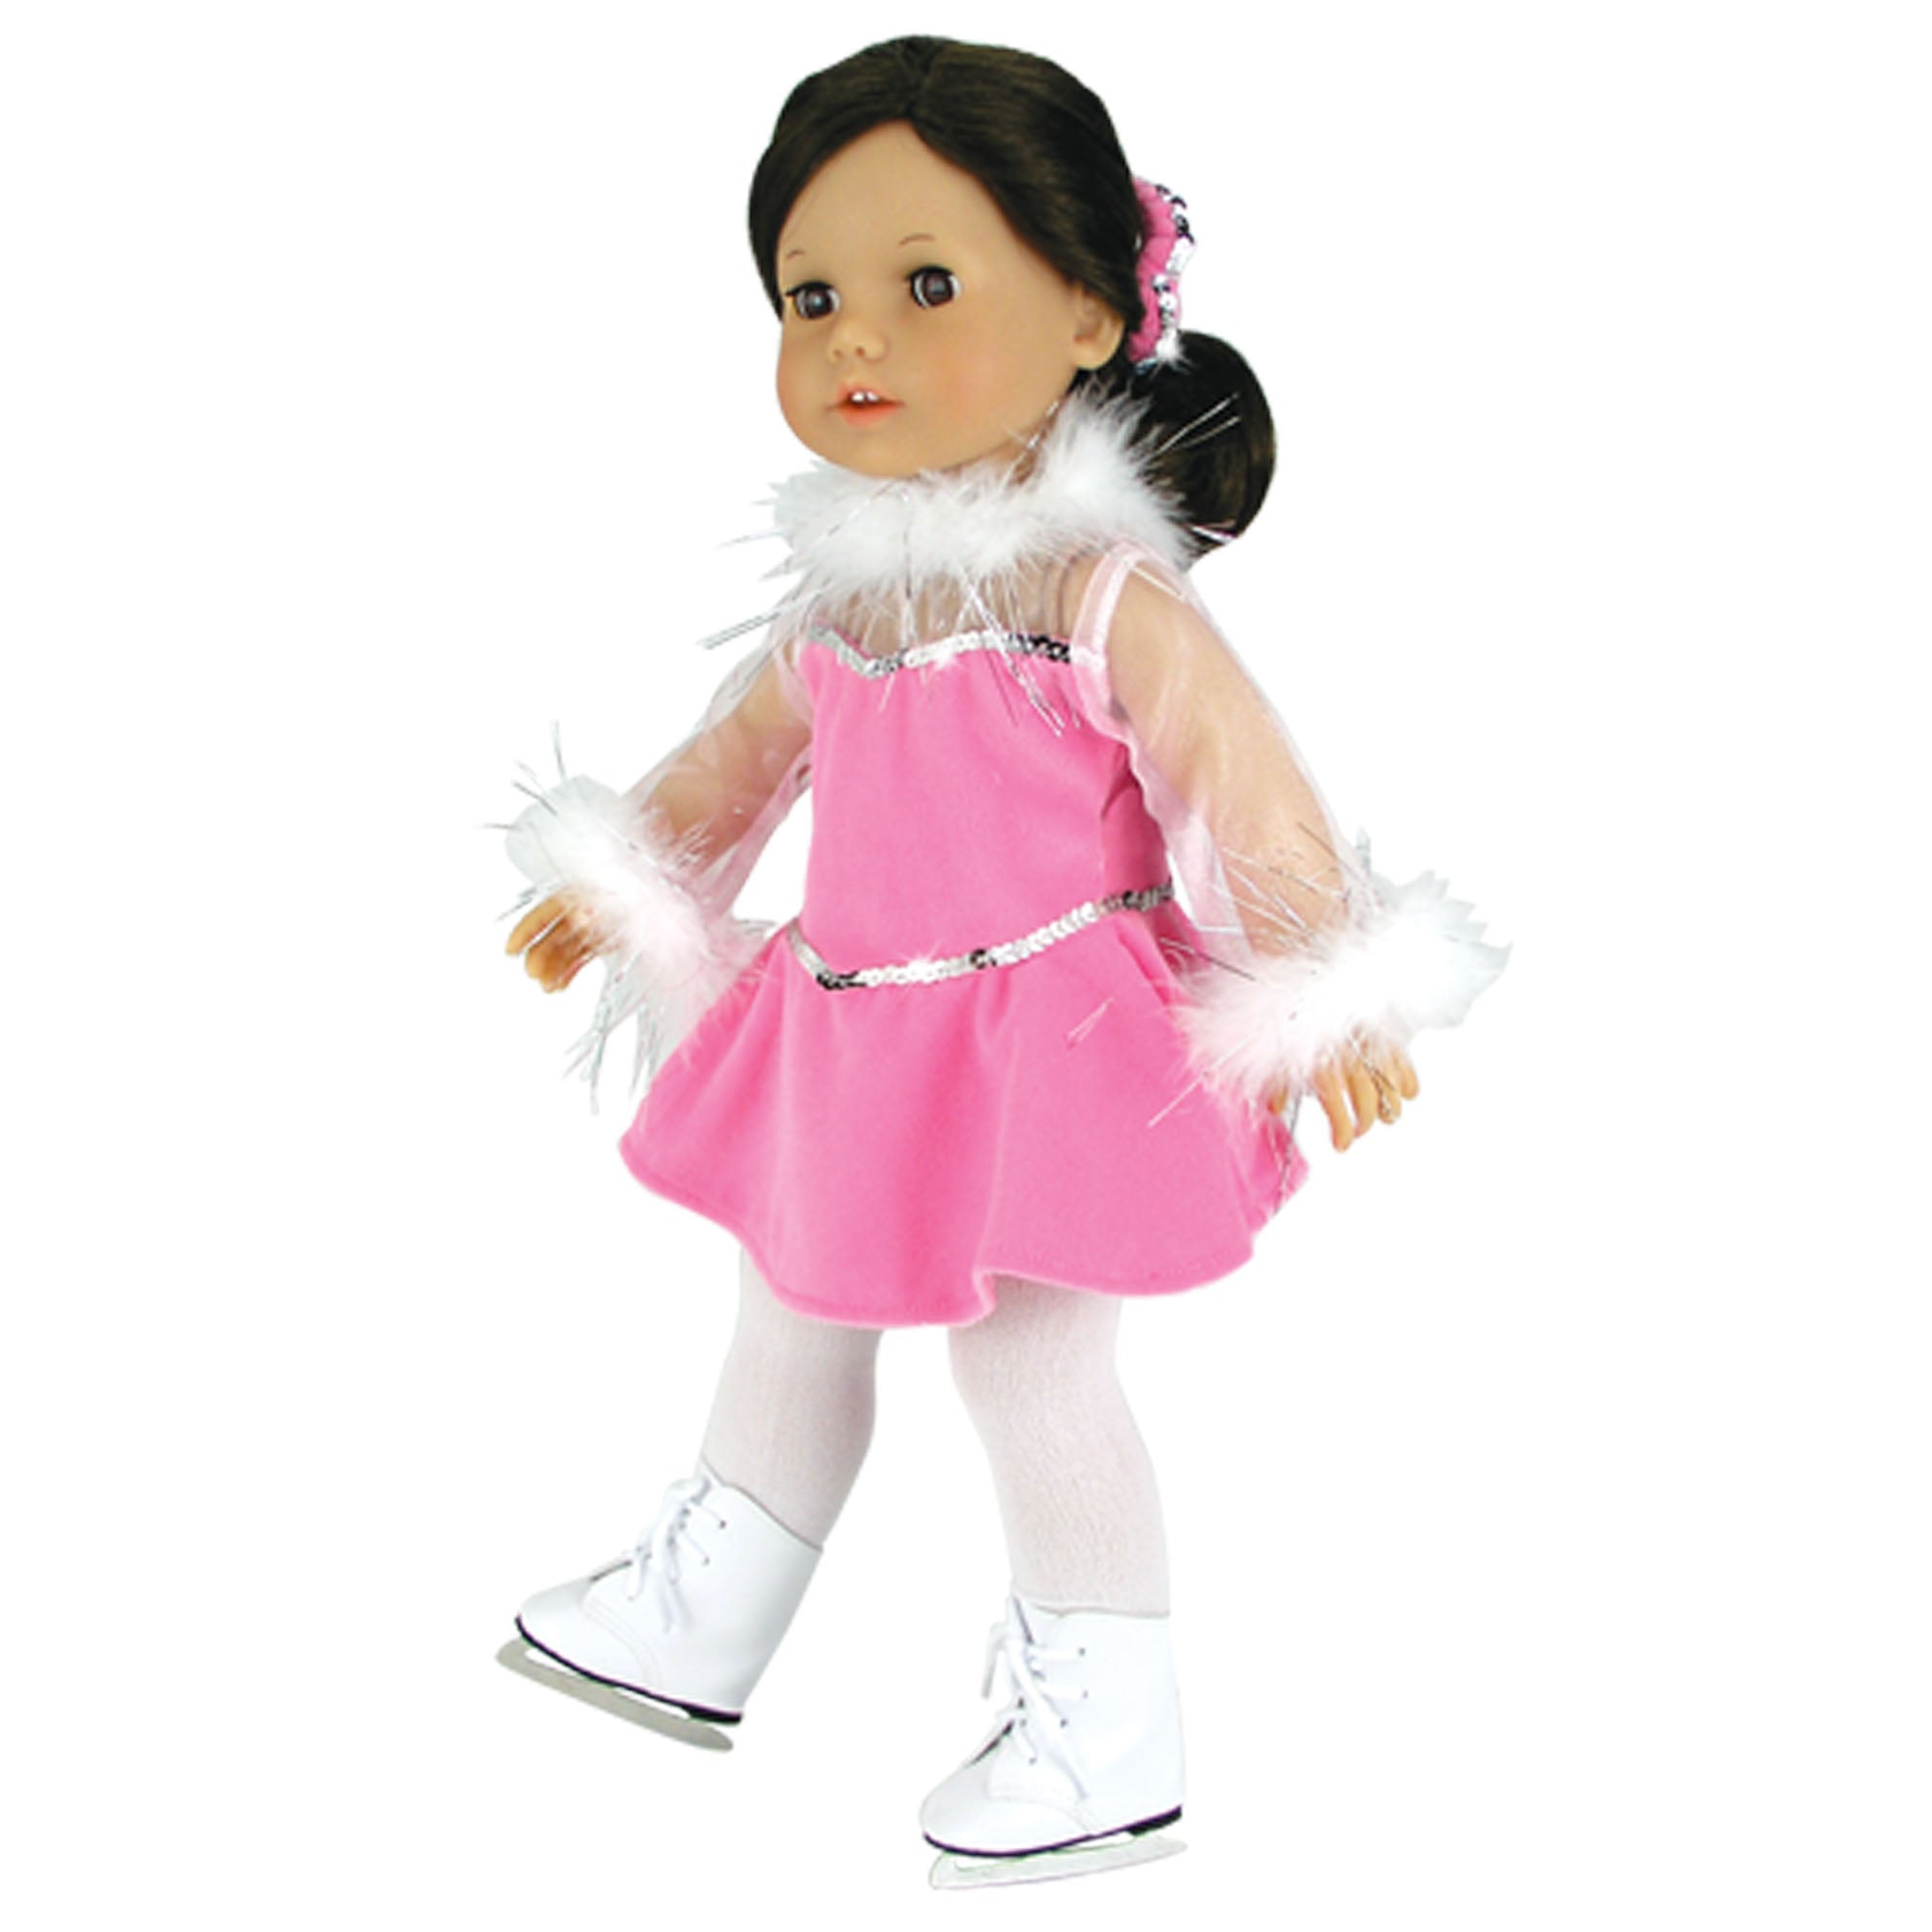 Sophia's Complete Figure Skating Outfit with Dress, Ice Skates and Accessories for 18" Dolls, Pink/Silver